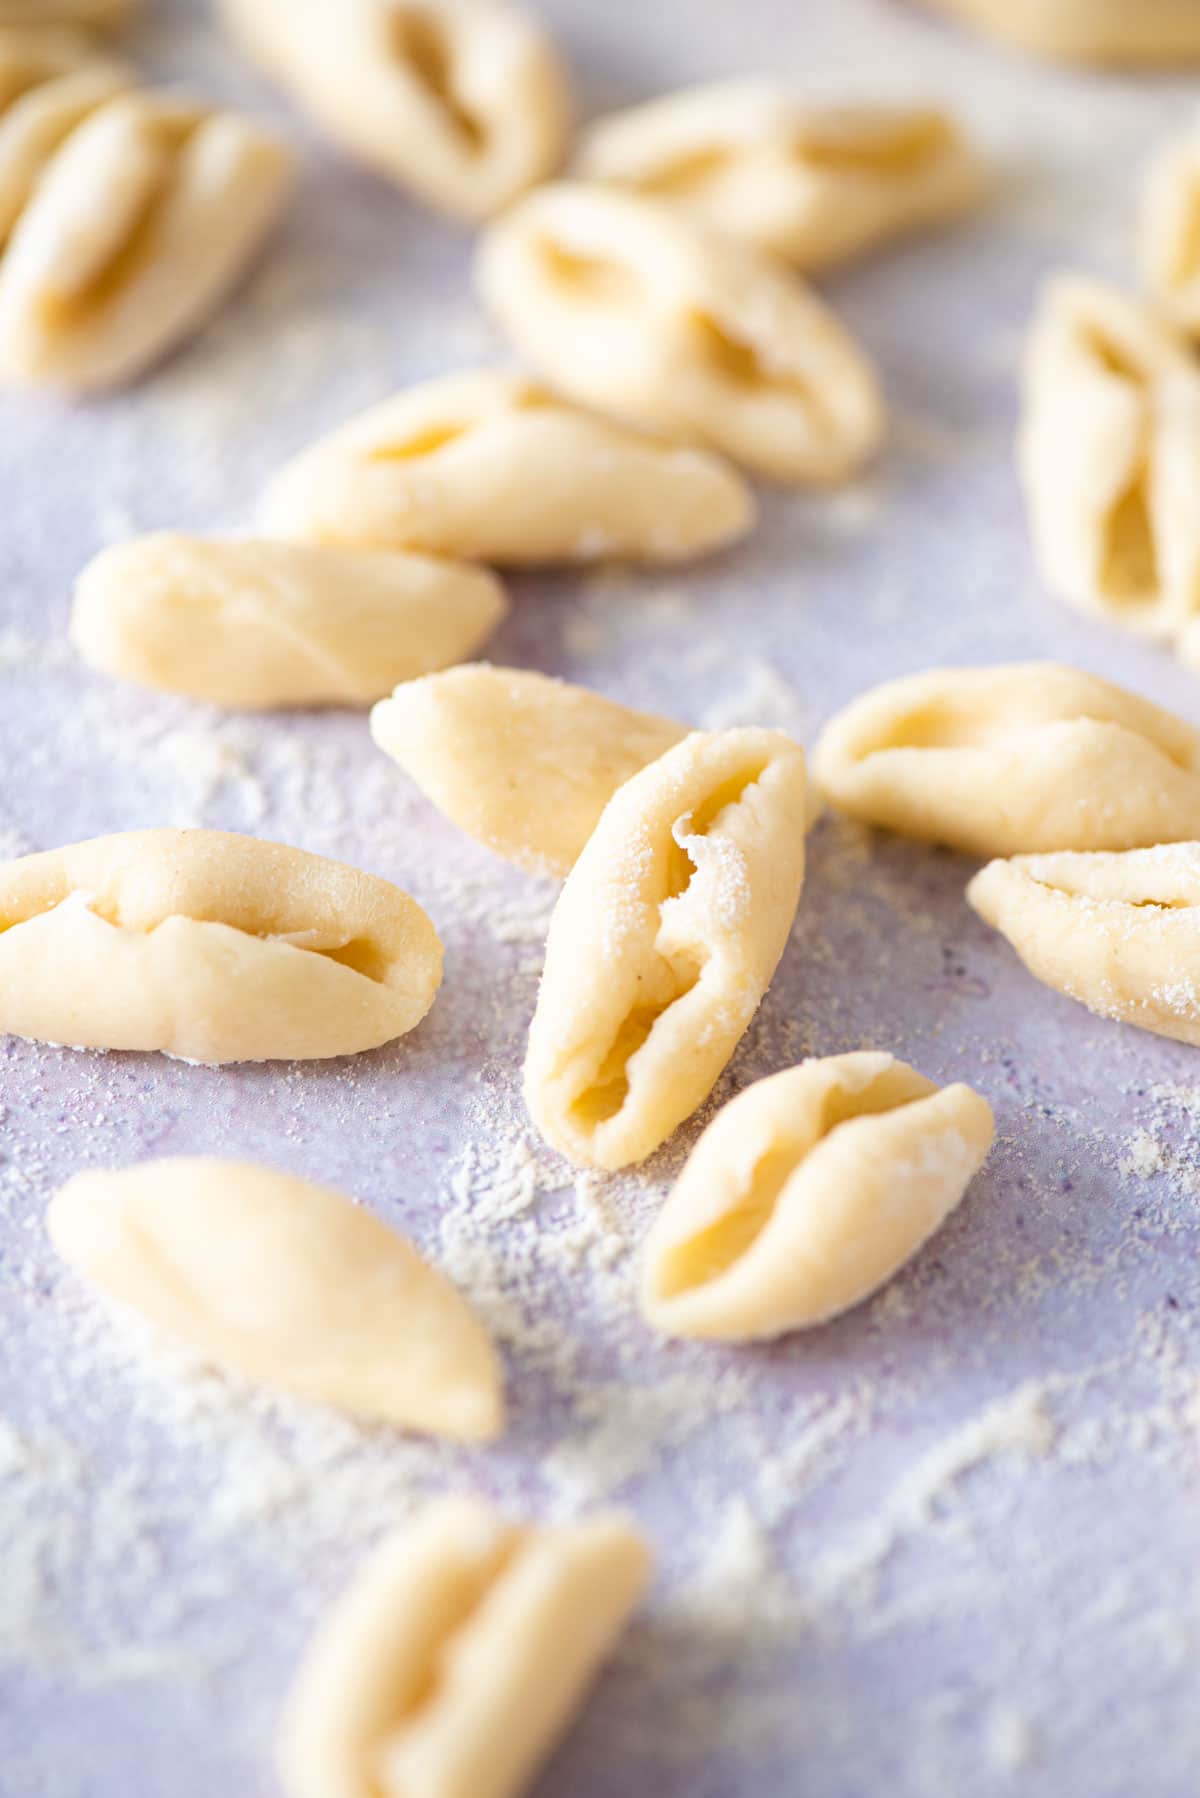 A close up of fresh cavatelli pasta on a blue work surface